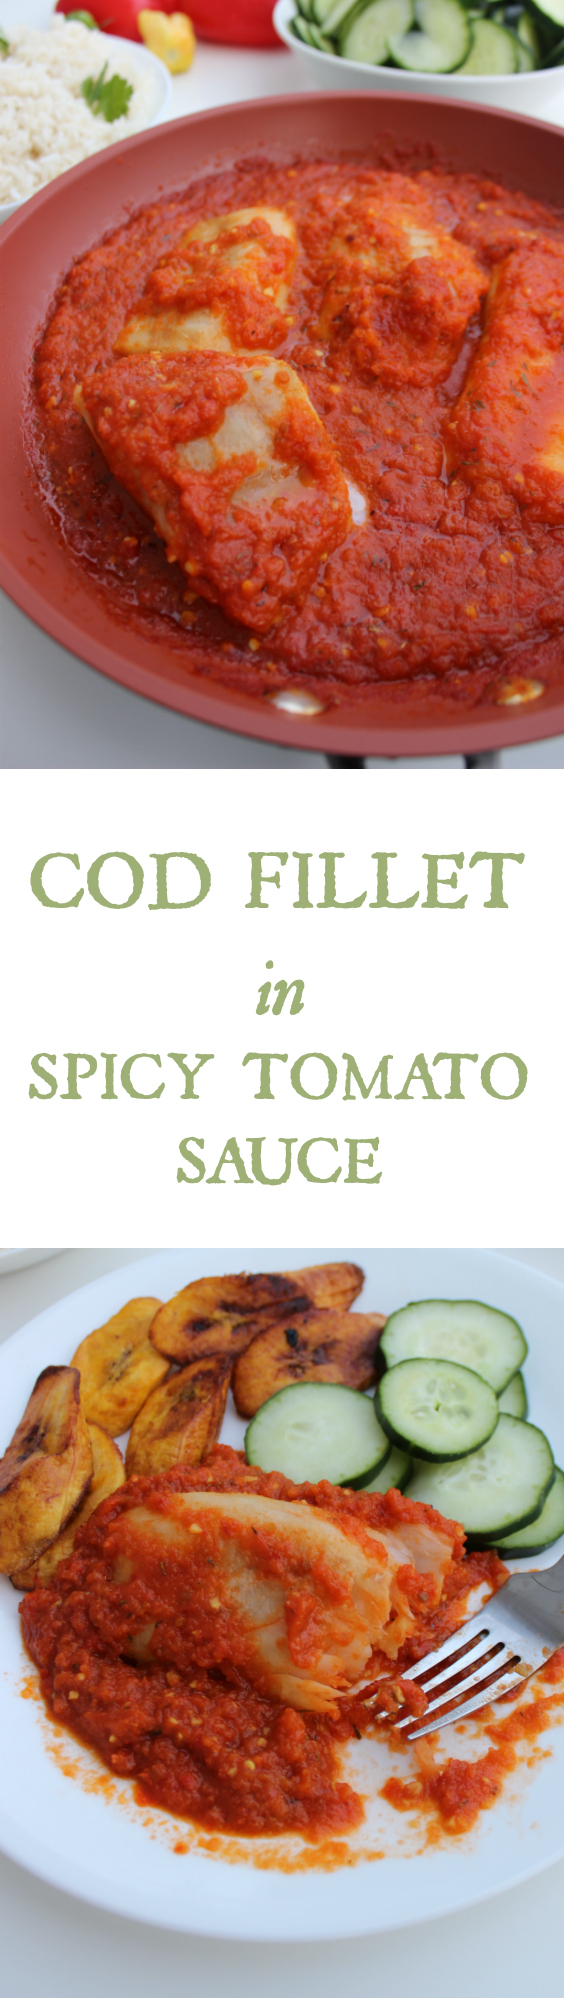 Say hello to your new favorite to your new favorite Cod Fillet in spicy tomato sauce. Great for a dinner ready in less than 30 minutes #AskForAlaska #IC (ad)